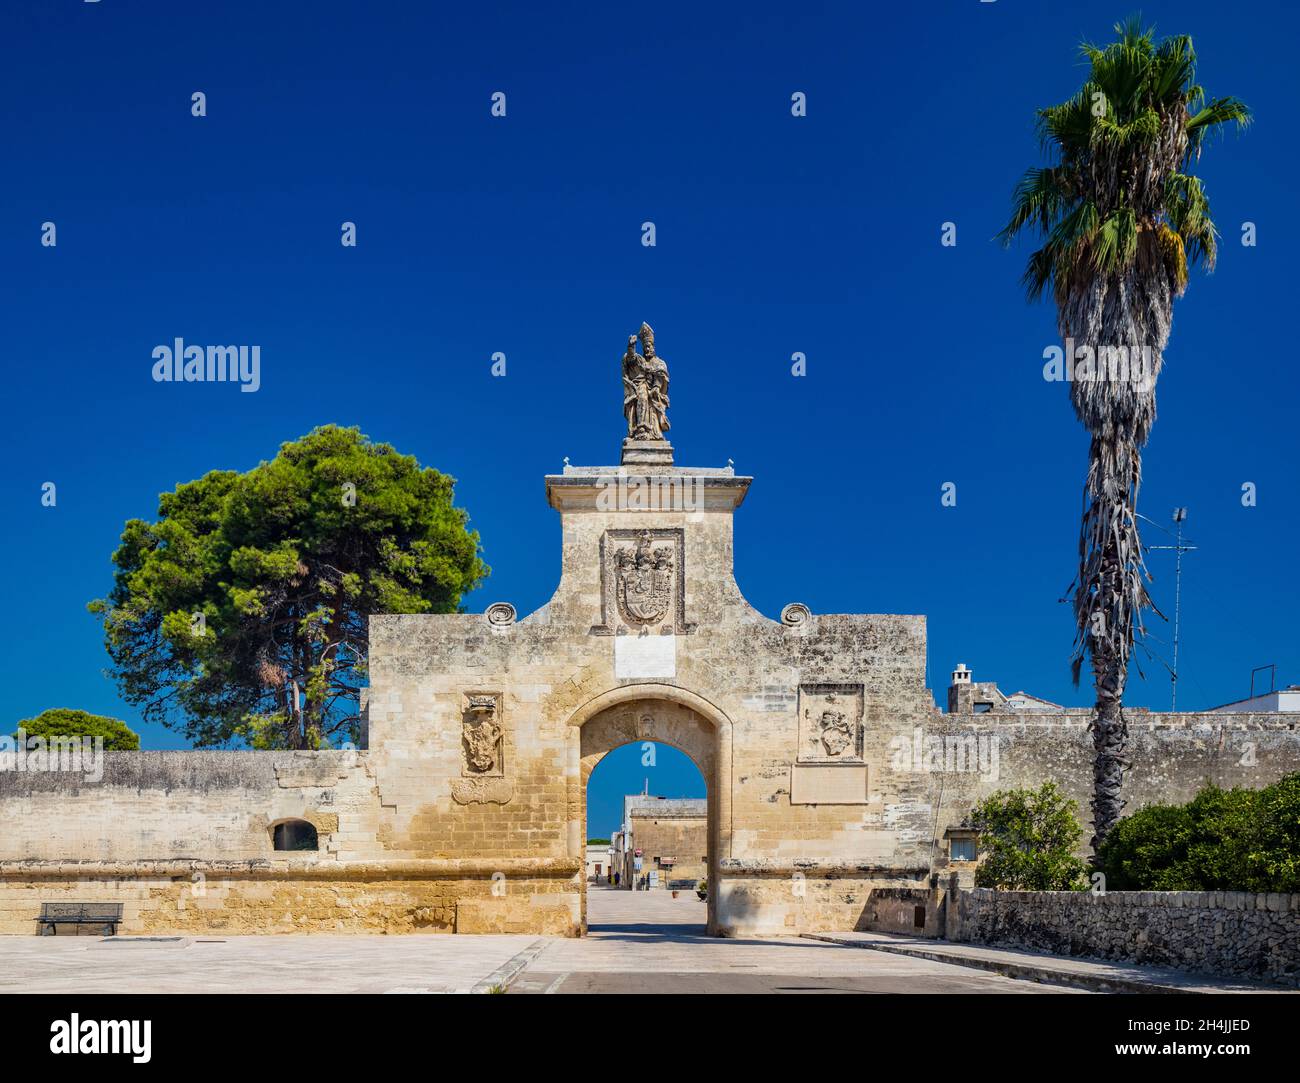 The small fortified village of Acaya, Lecce, Salento, Puglia, Italy. The large stone-paved square. The gateway to the city, with the large arch and th Stock Photo